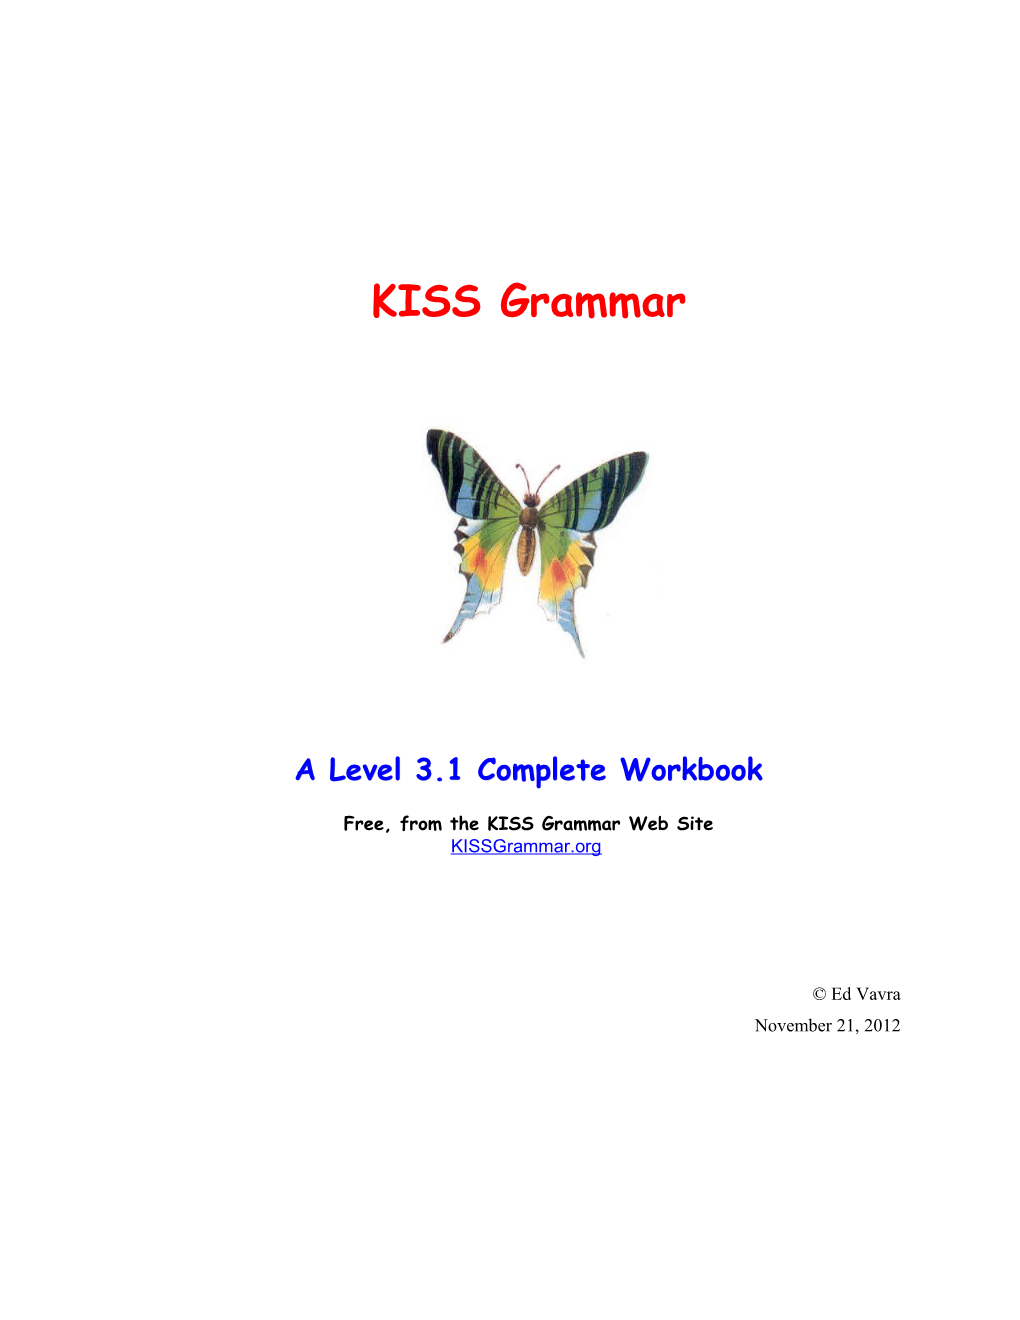 A Level 3.1 Complete Workbook